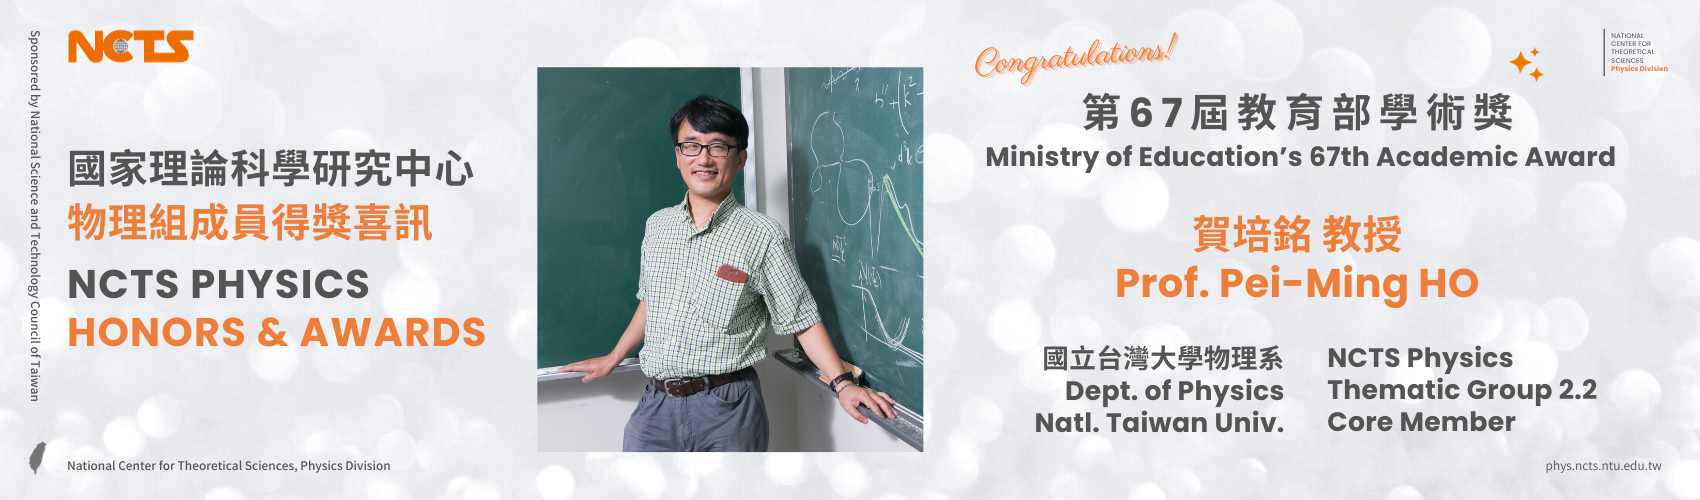 NCTS Congratulates Prof. Pei-Ming Ho on Winning MOE 67th Academic Award